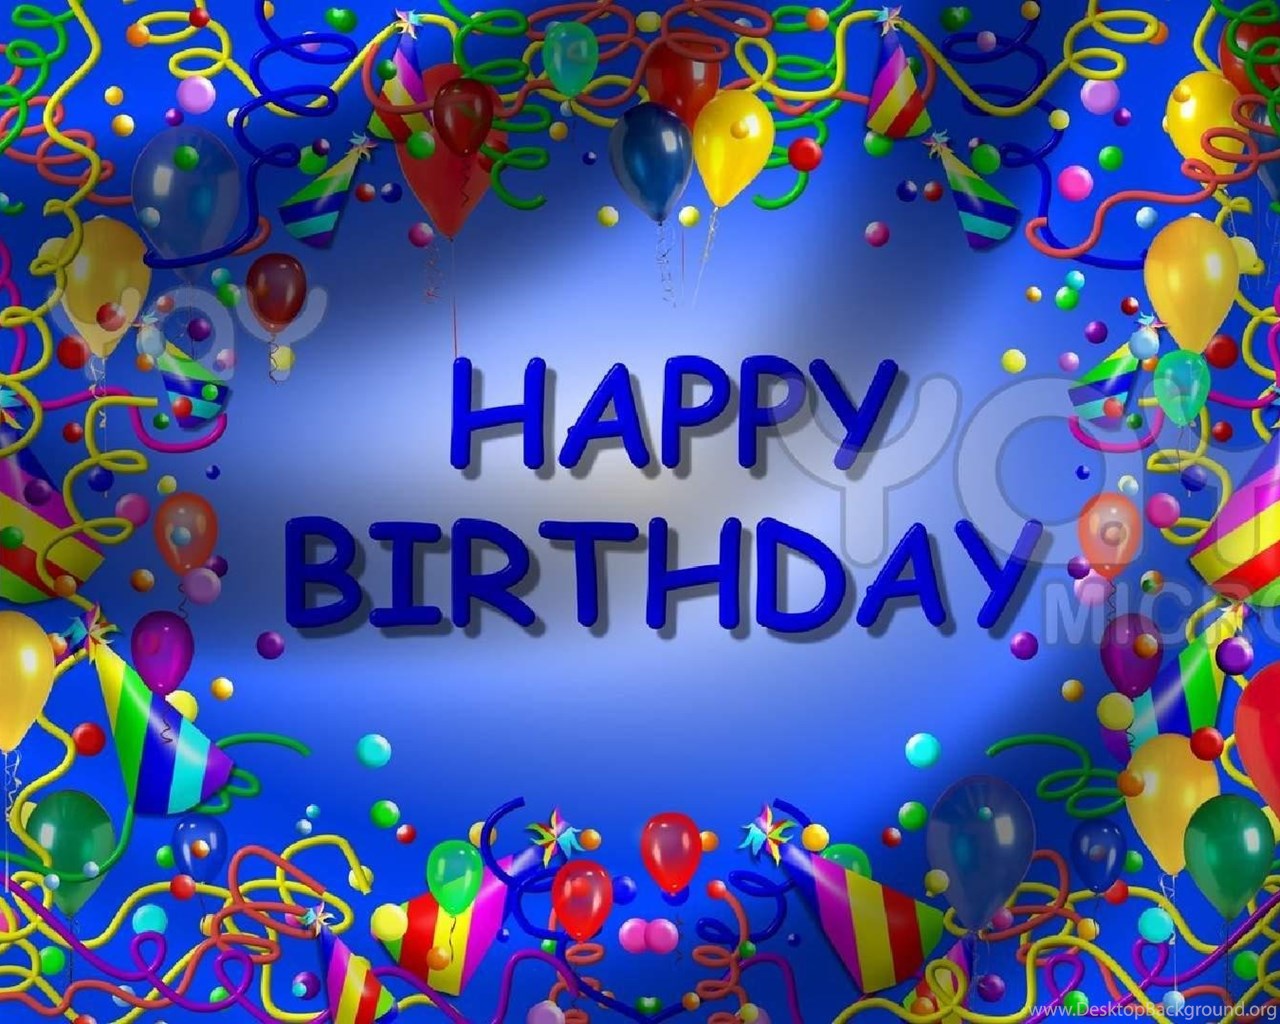  Happy  Birthday  Backgrounds  Blue Theme Template Free 